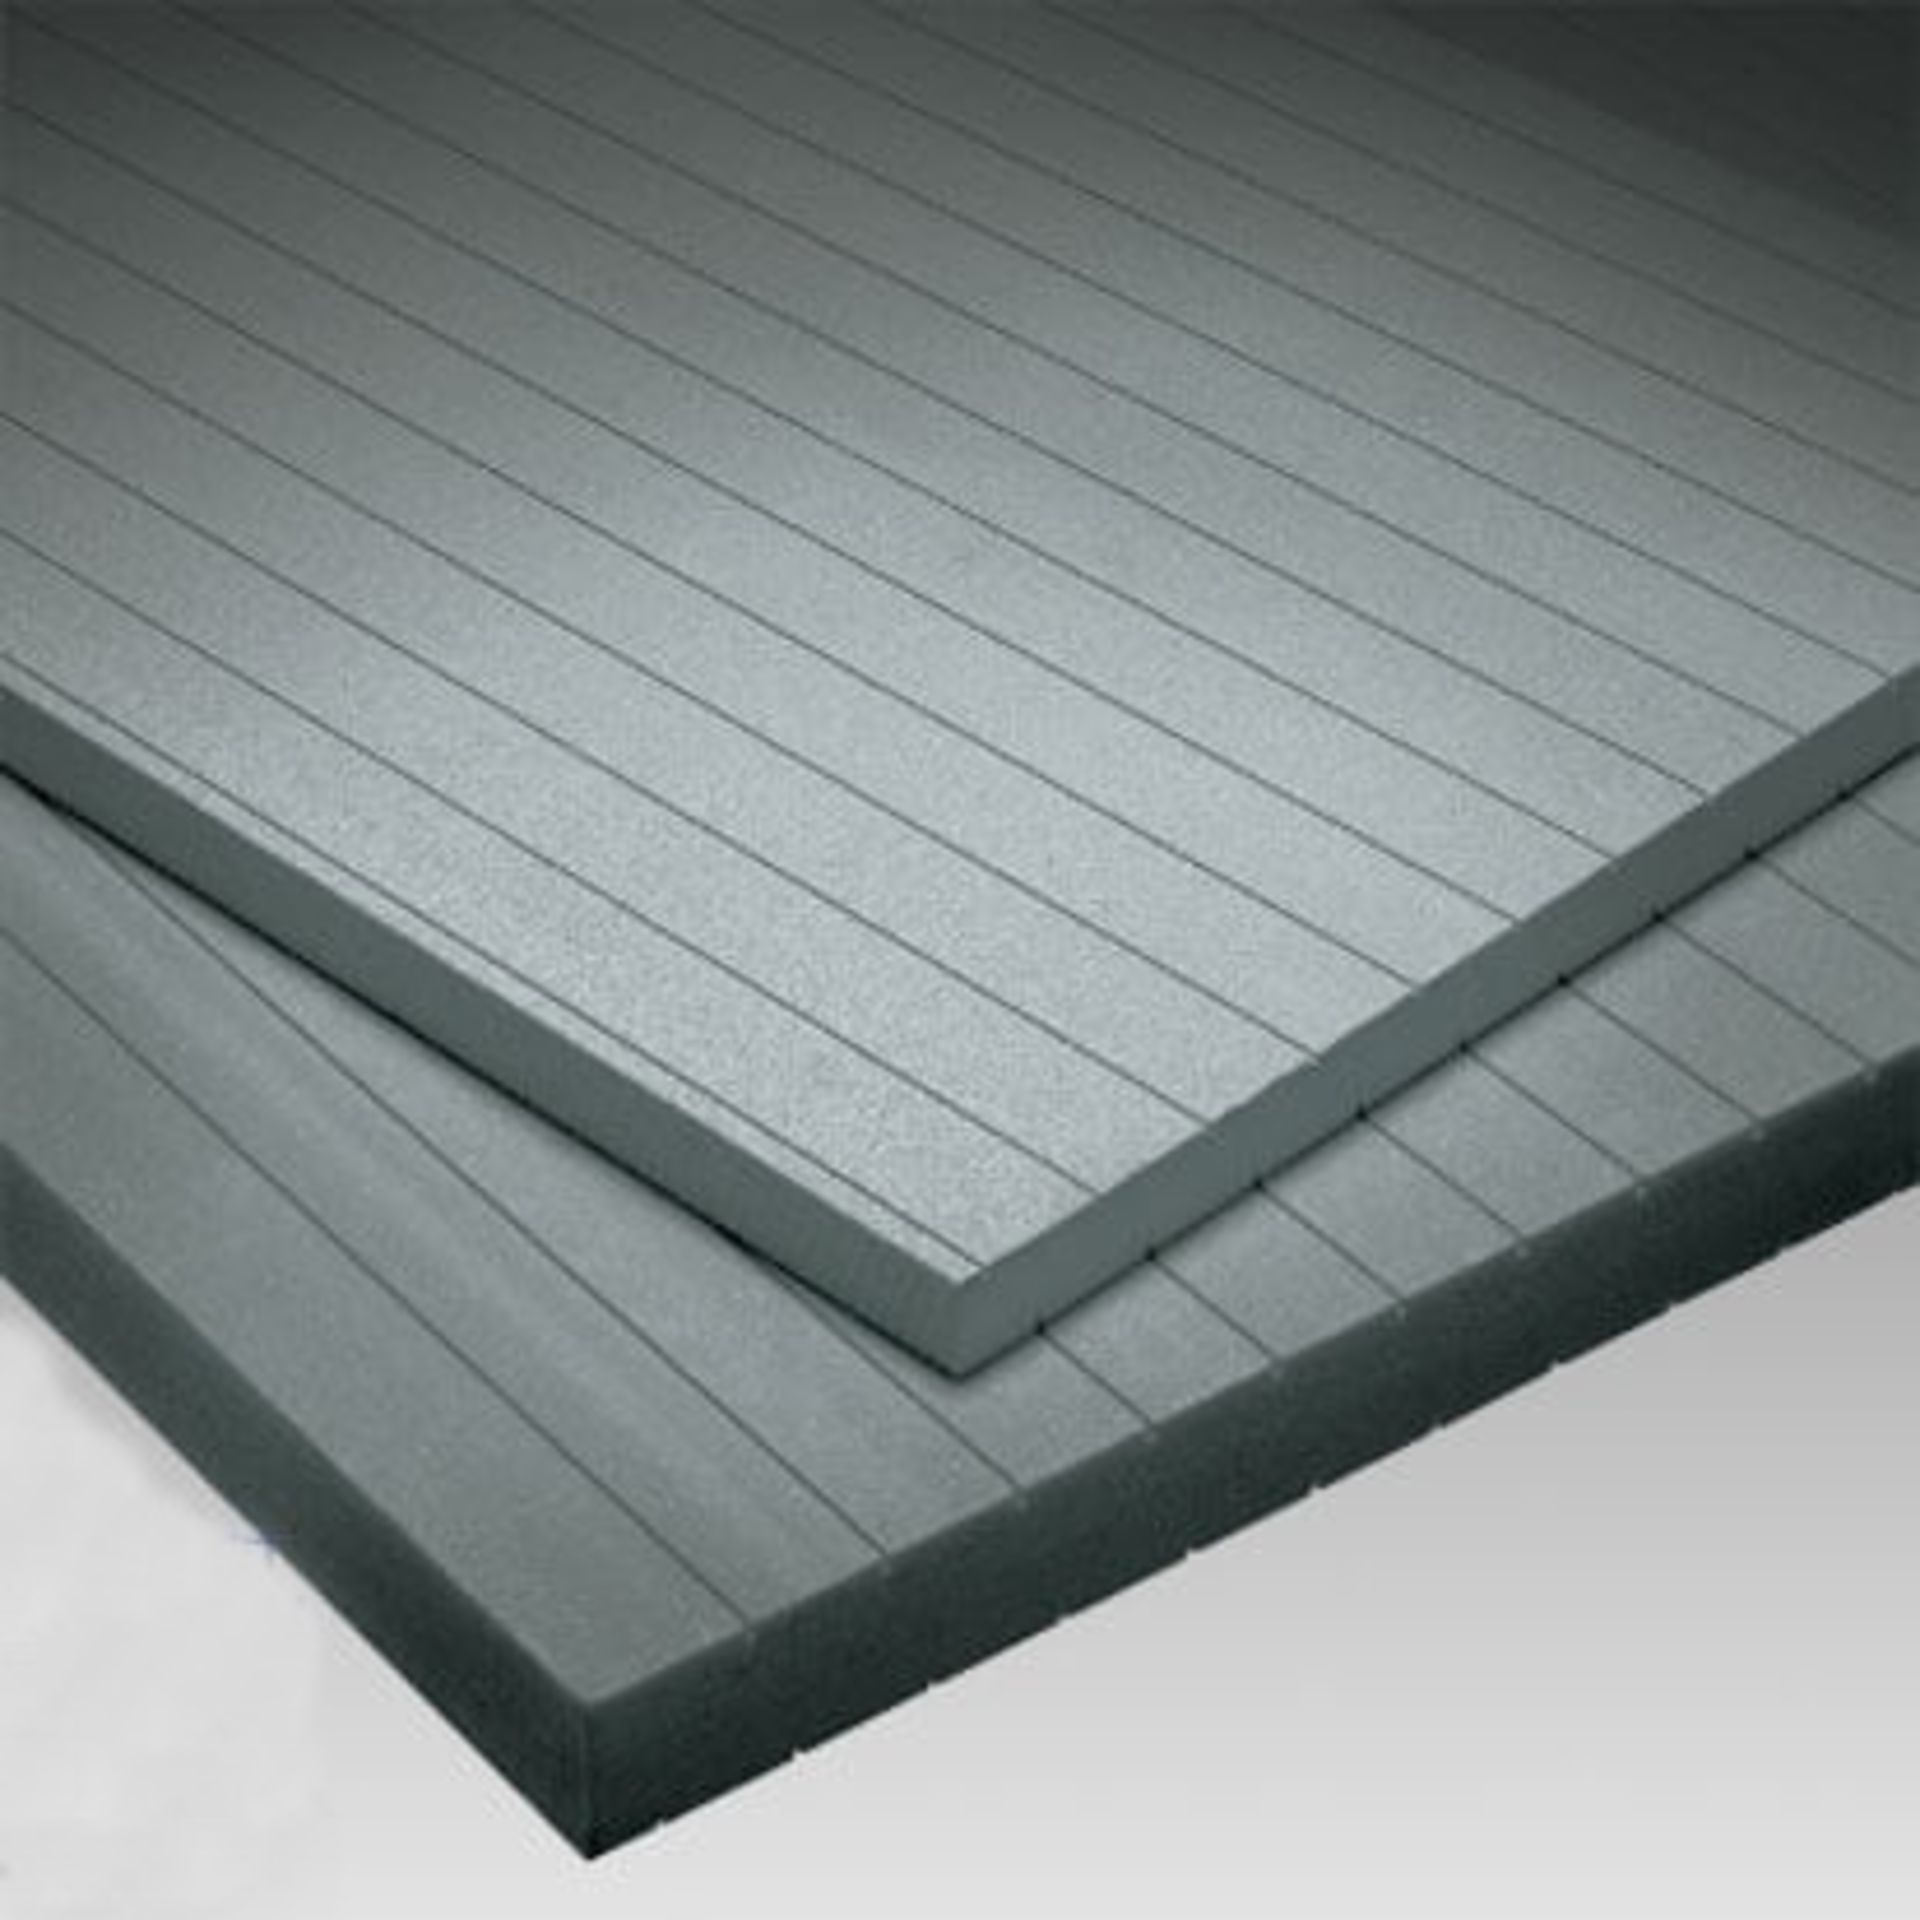 12 x Xenergy RTM Plus Extruded Polystyrene Thermal Insulation Boards - Size: 600 x 2500 x 35mm - New